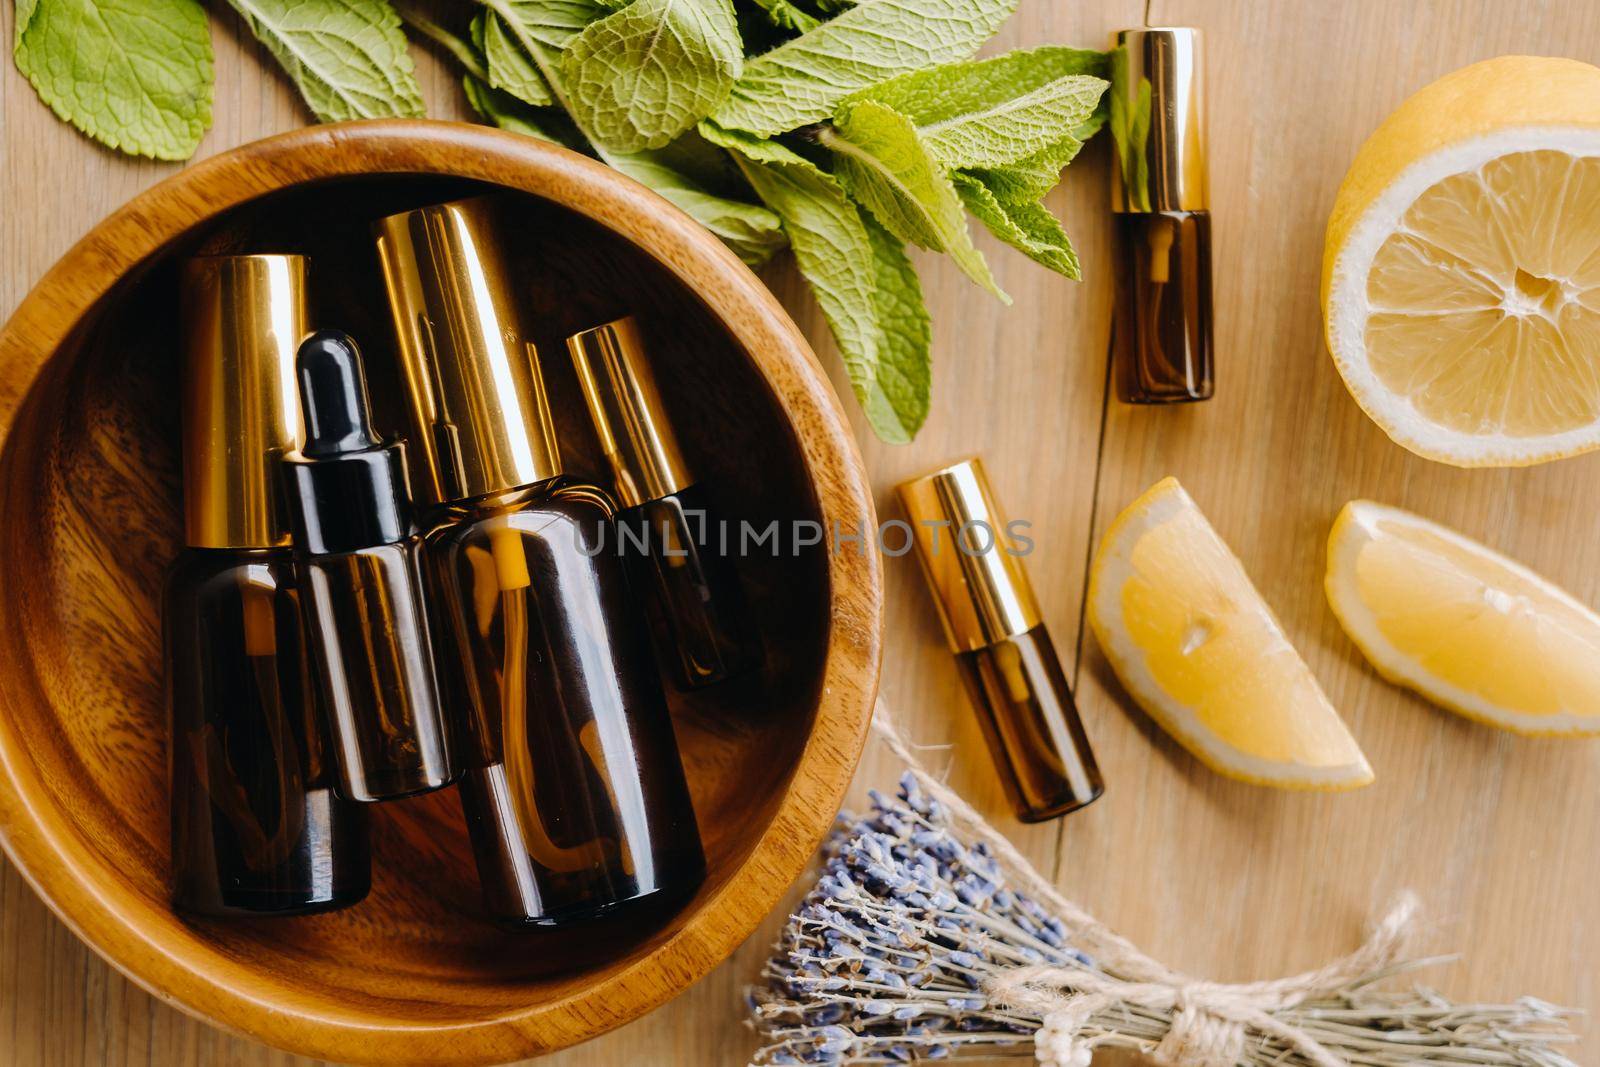 Essential oil in bottles with the aroma of lemon, mint and lavender, lying on a wooden surface.